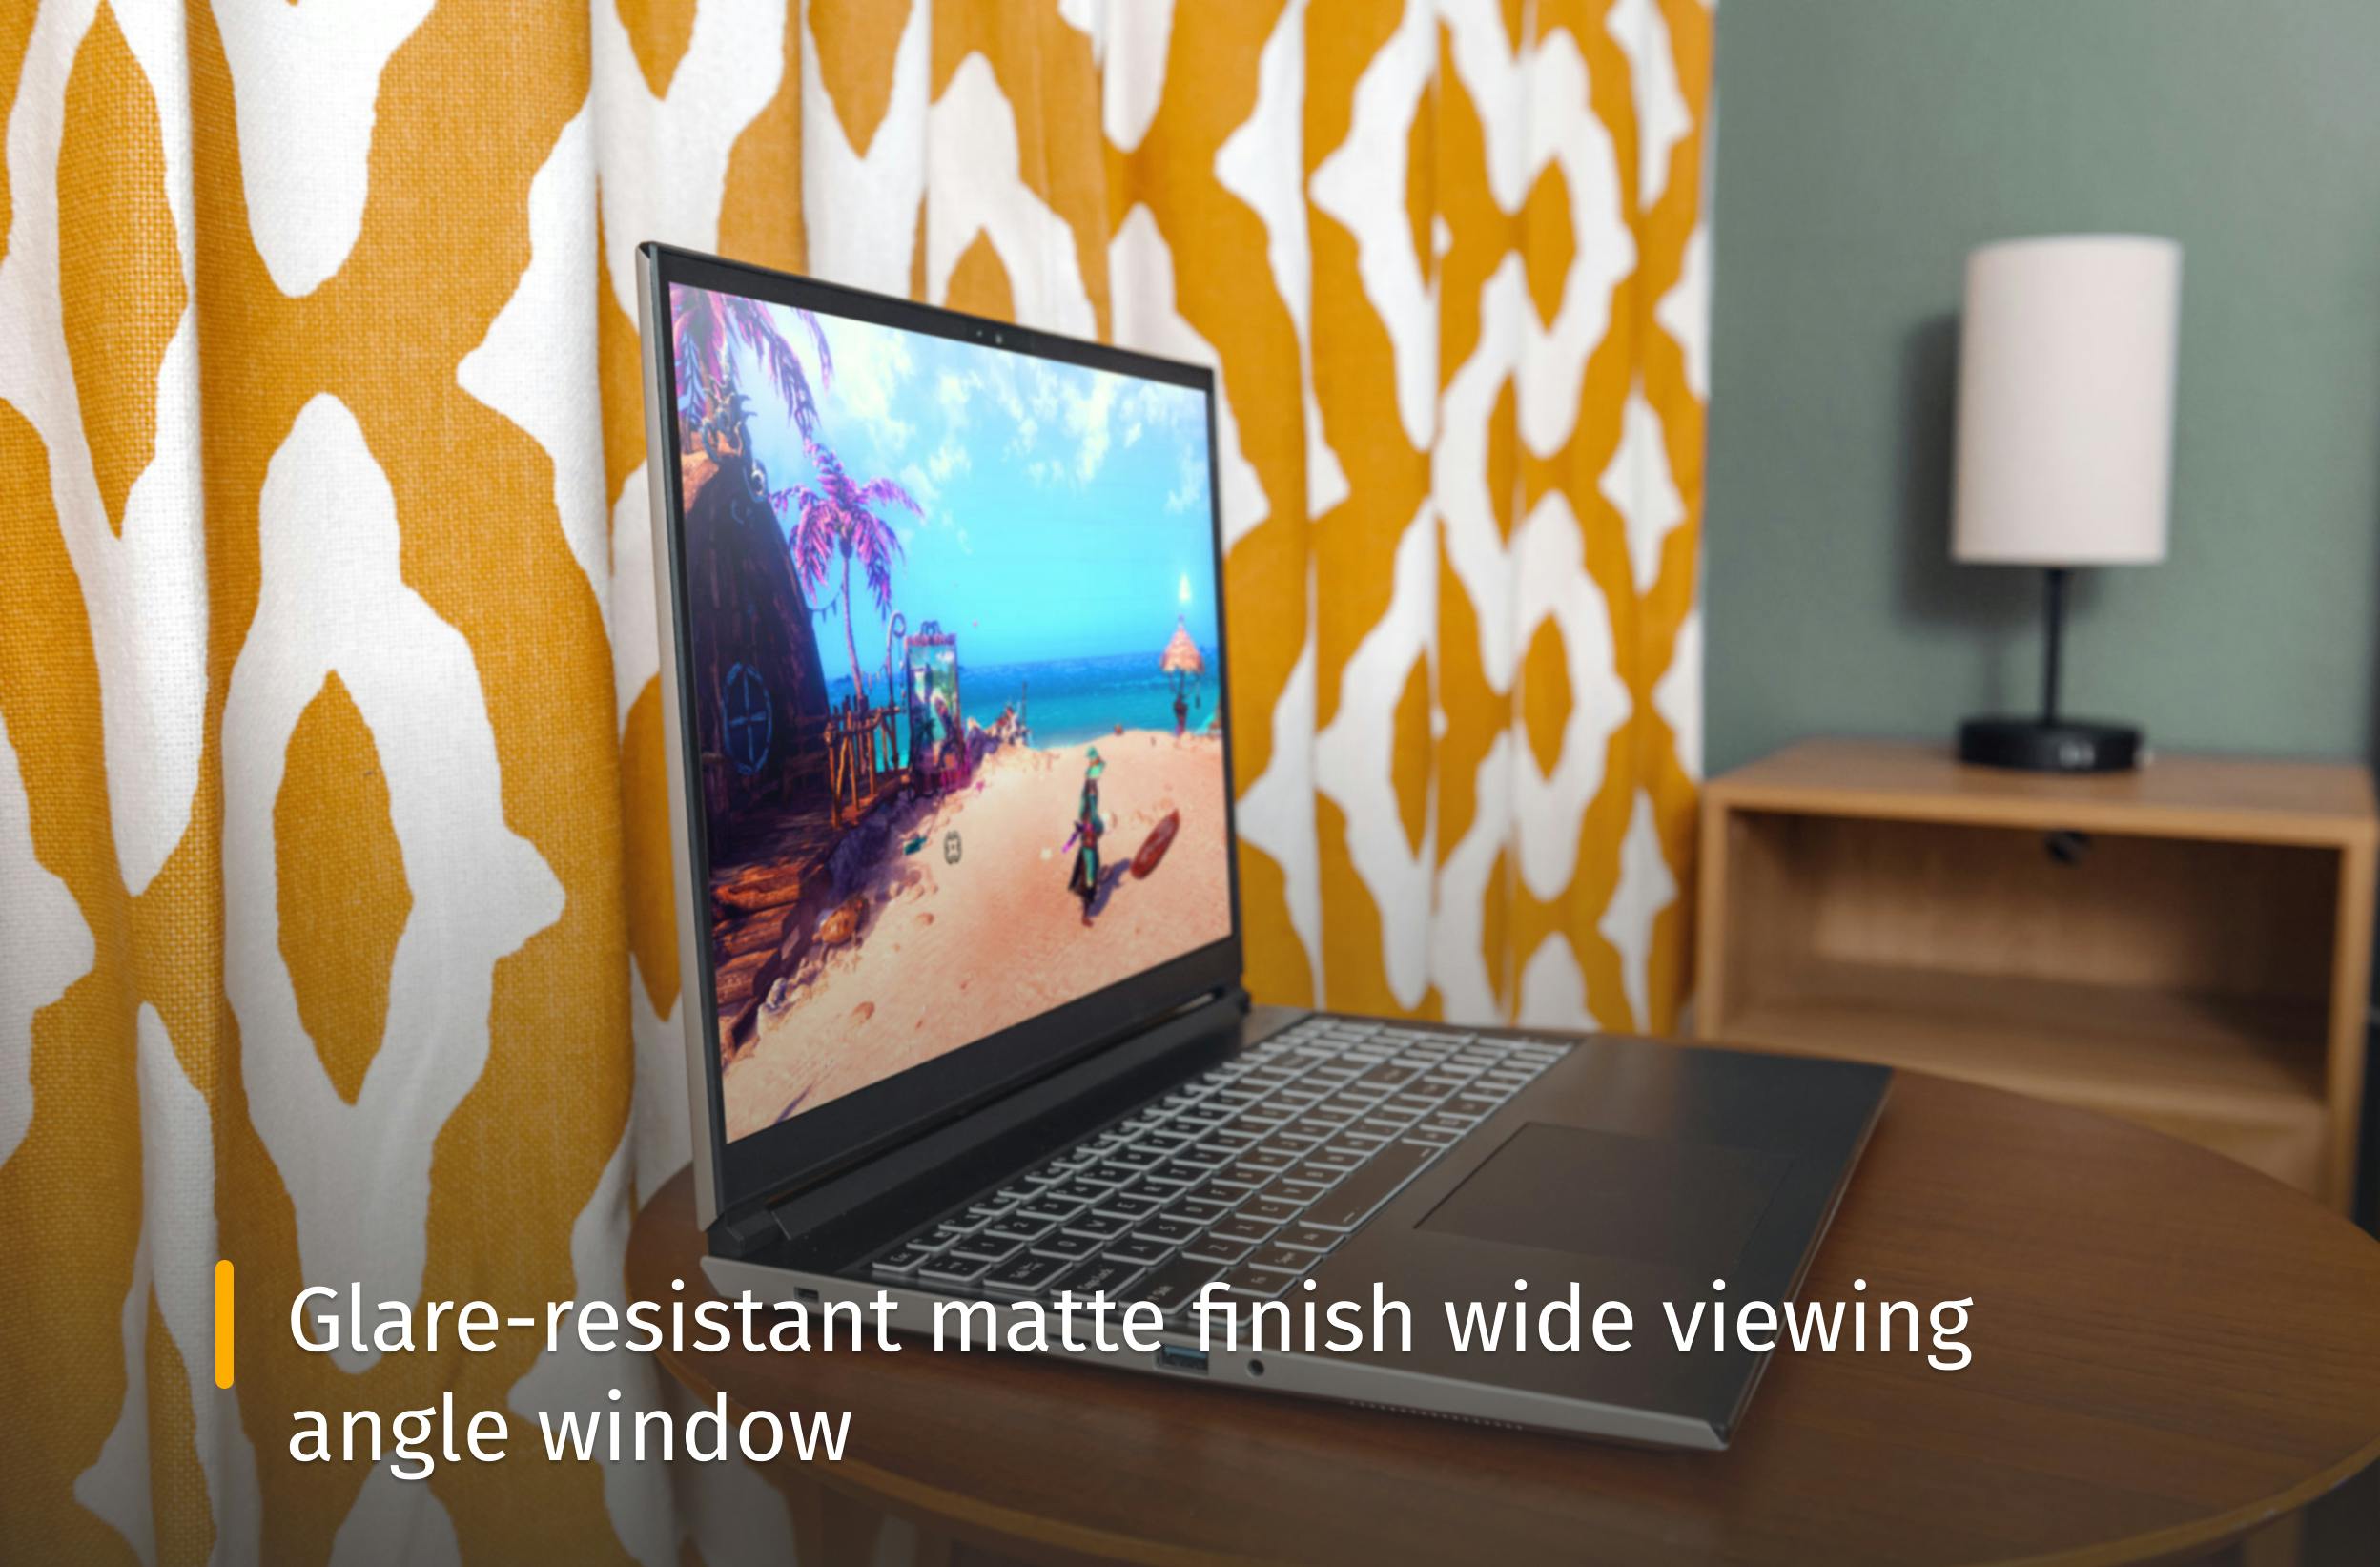 Darter Pro on a table next to yellow curtains and text that reads "Glare-resistant matte finish wide viewing angle window"